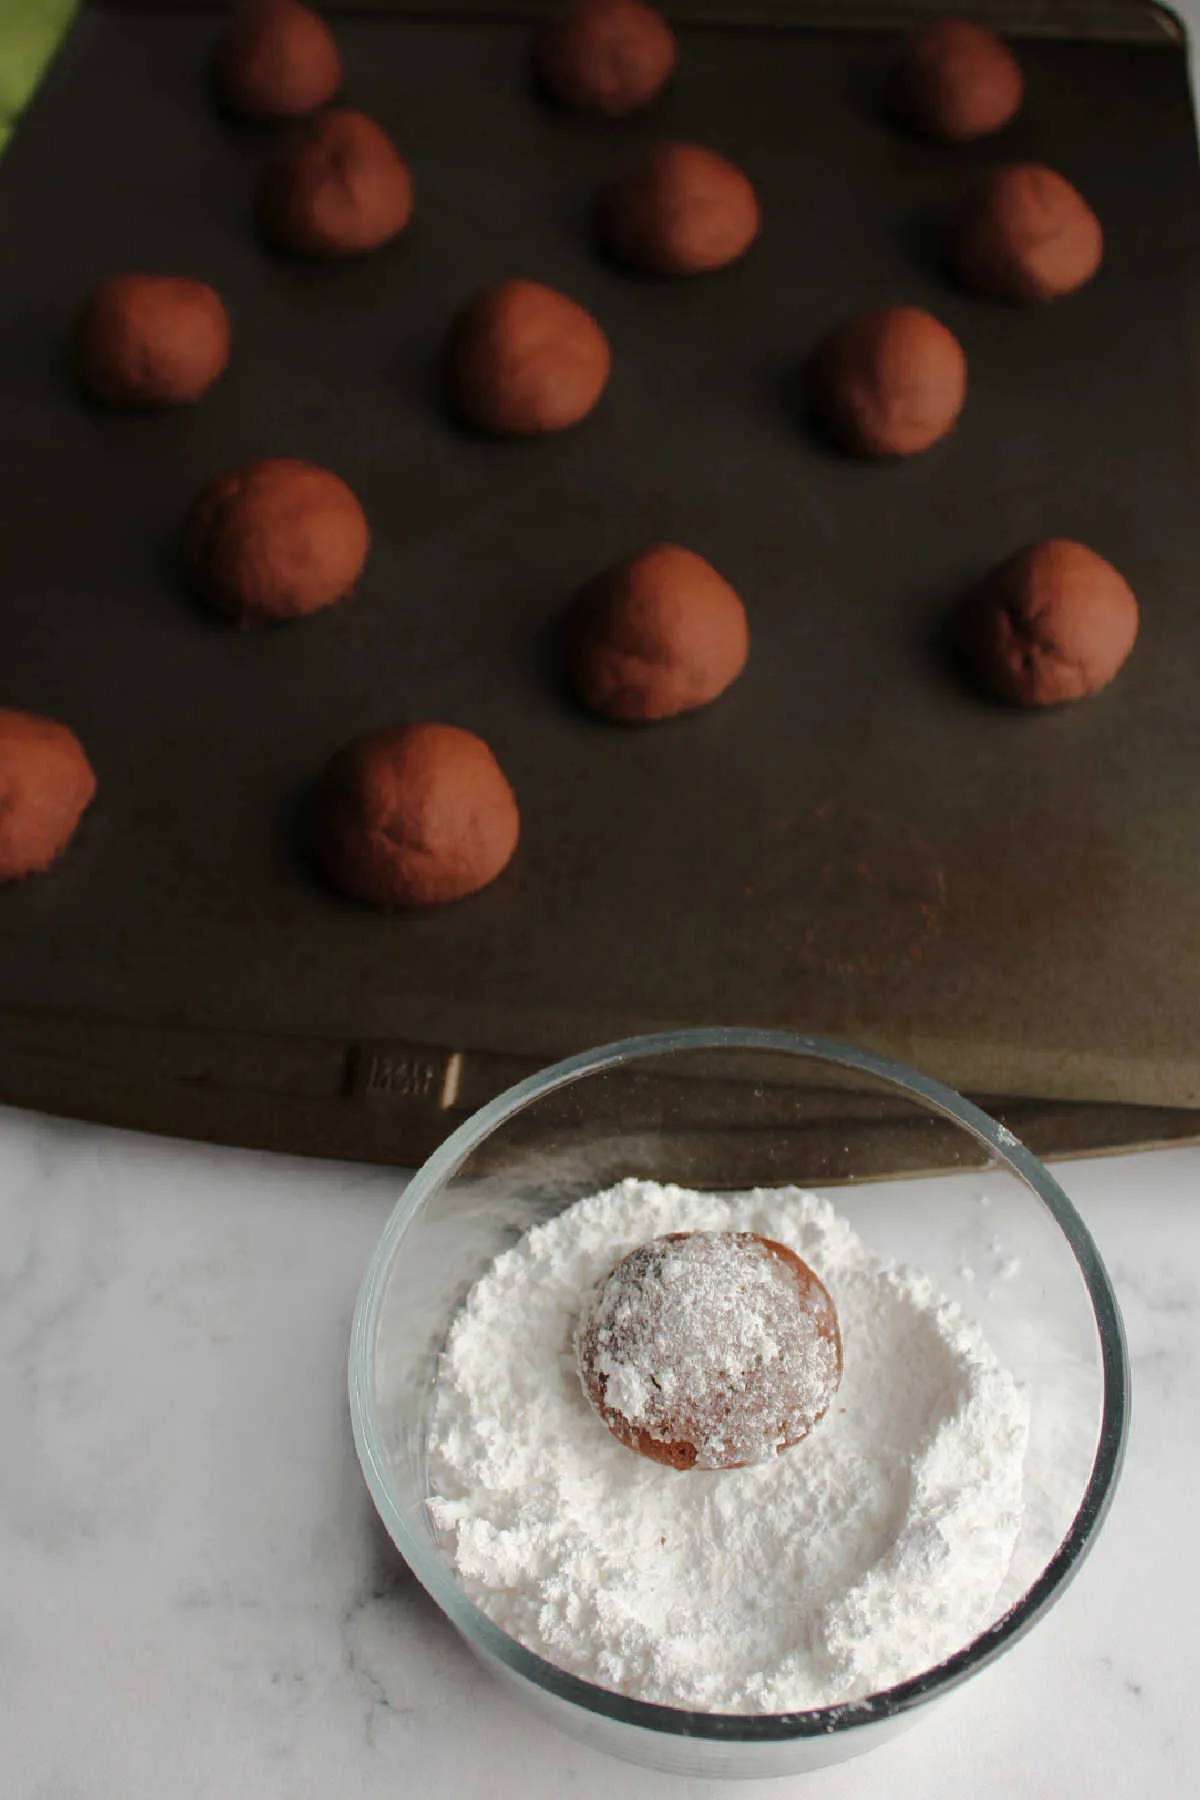 Rolling baked chocolate cookies in a bowl of powdered sugar.